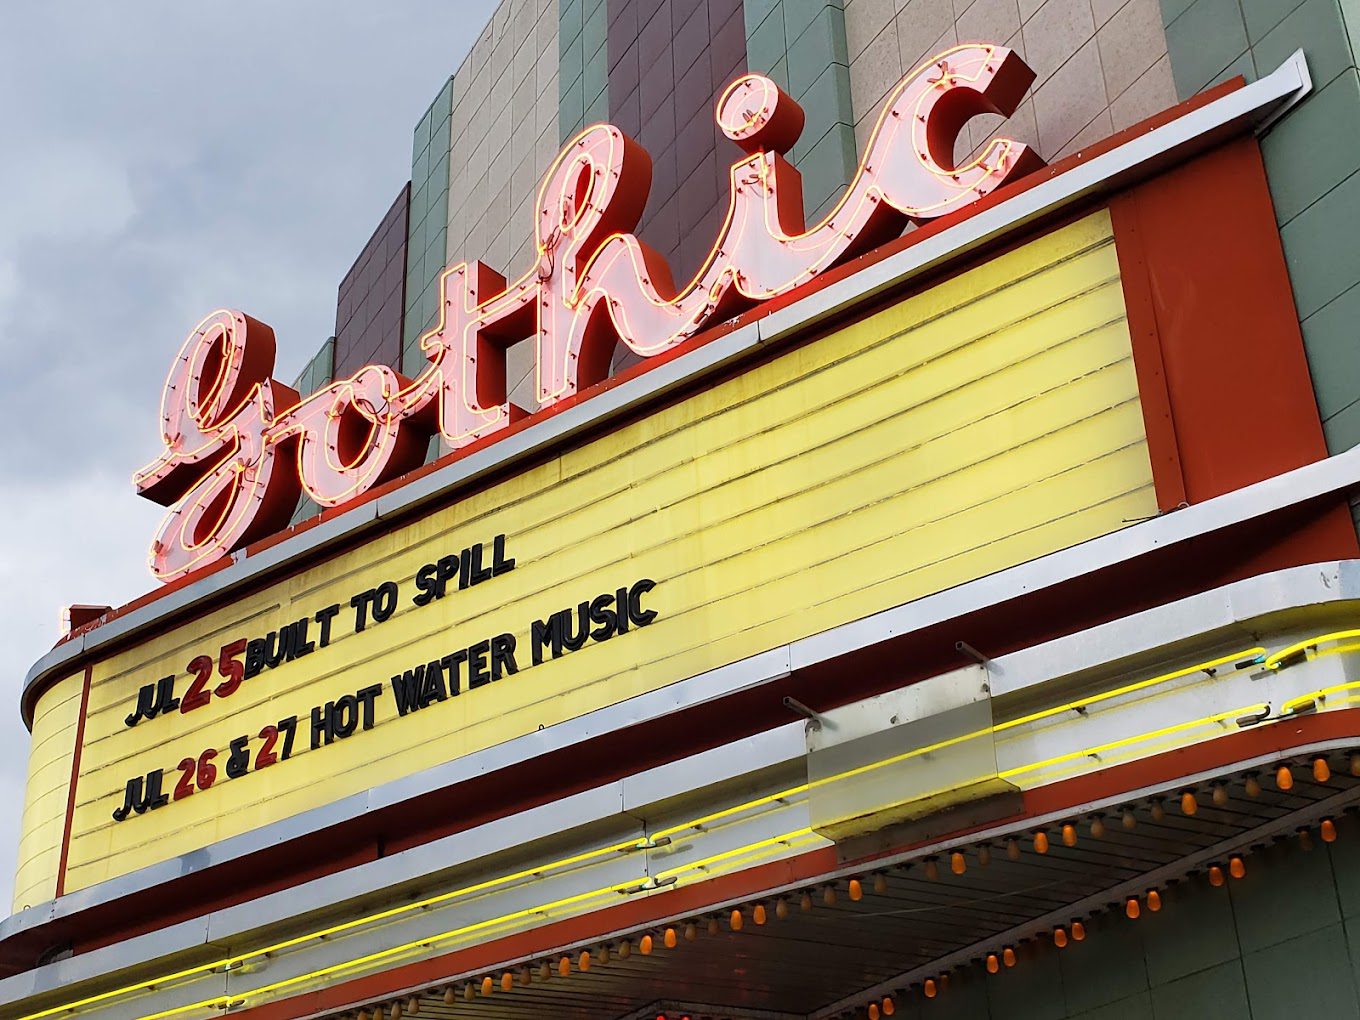 image of gothic theatre in englewood